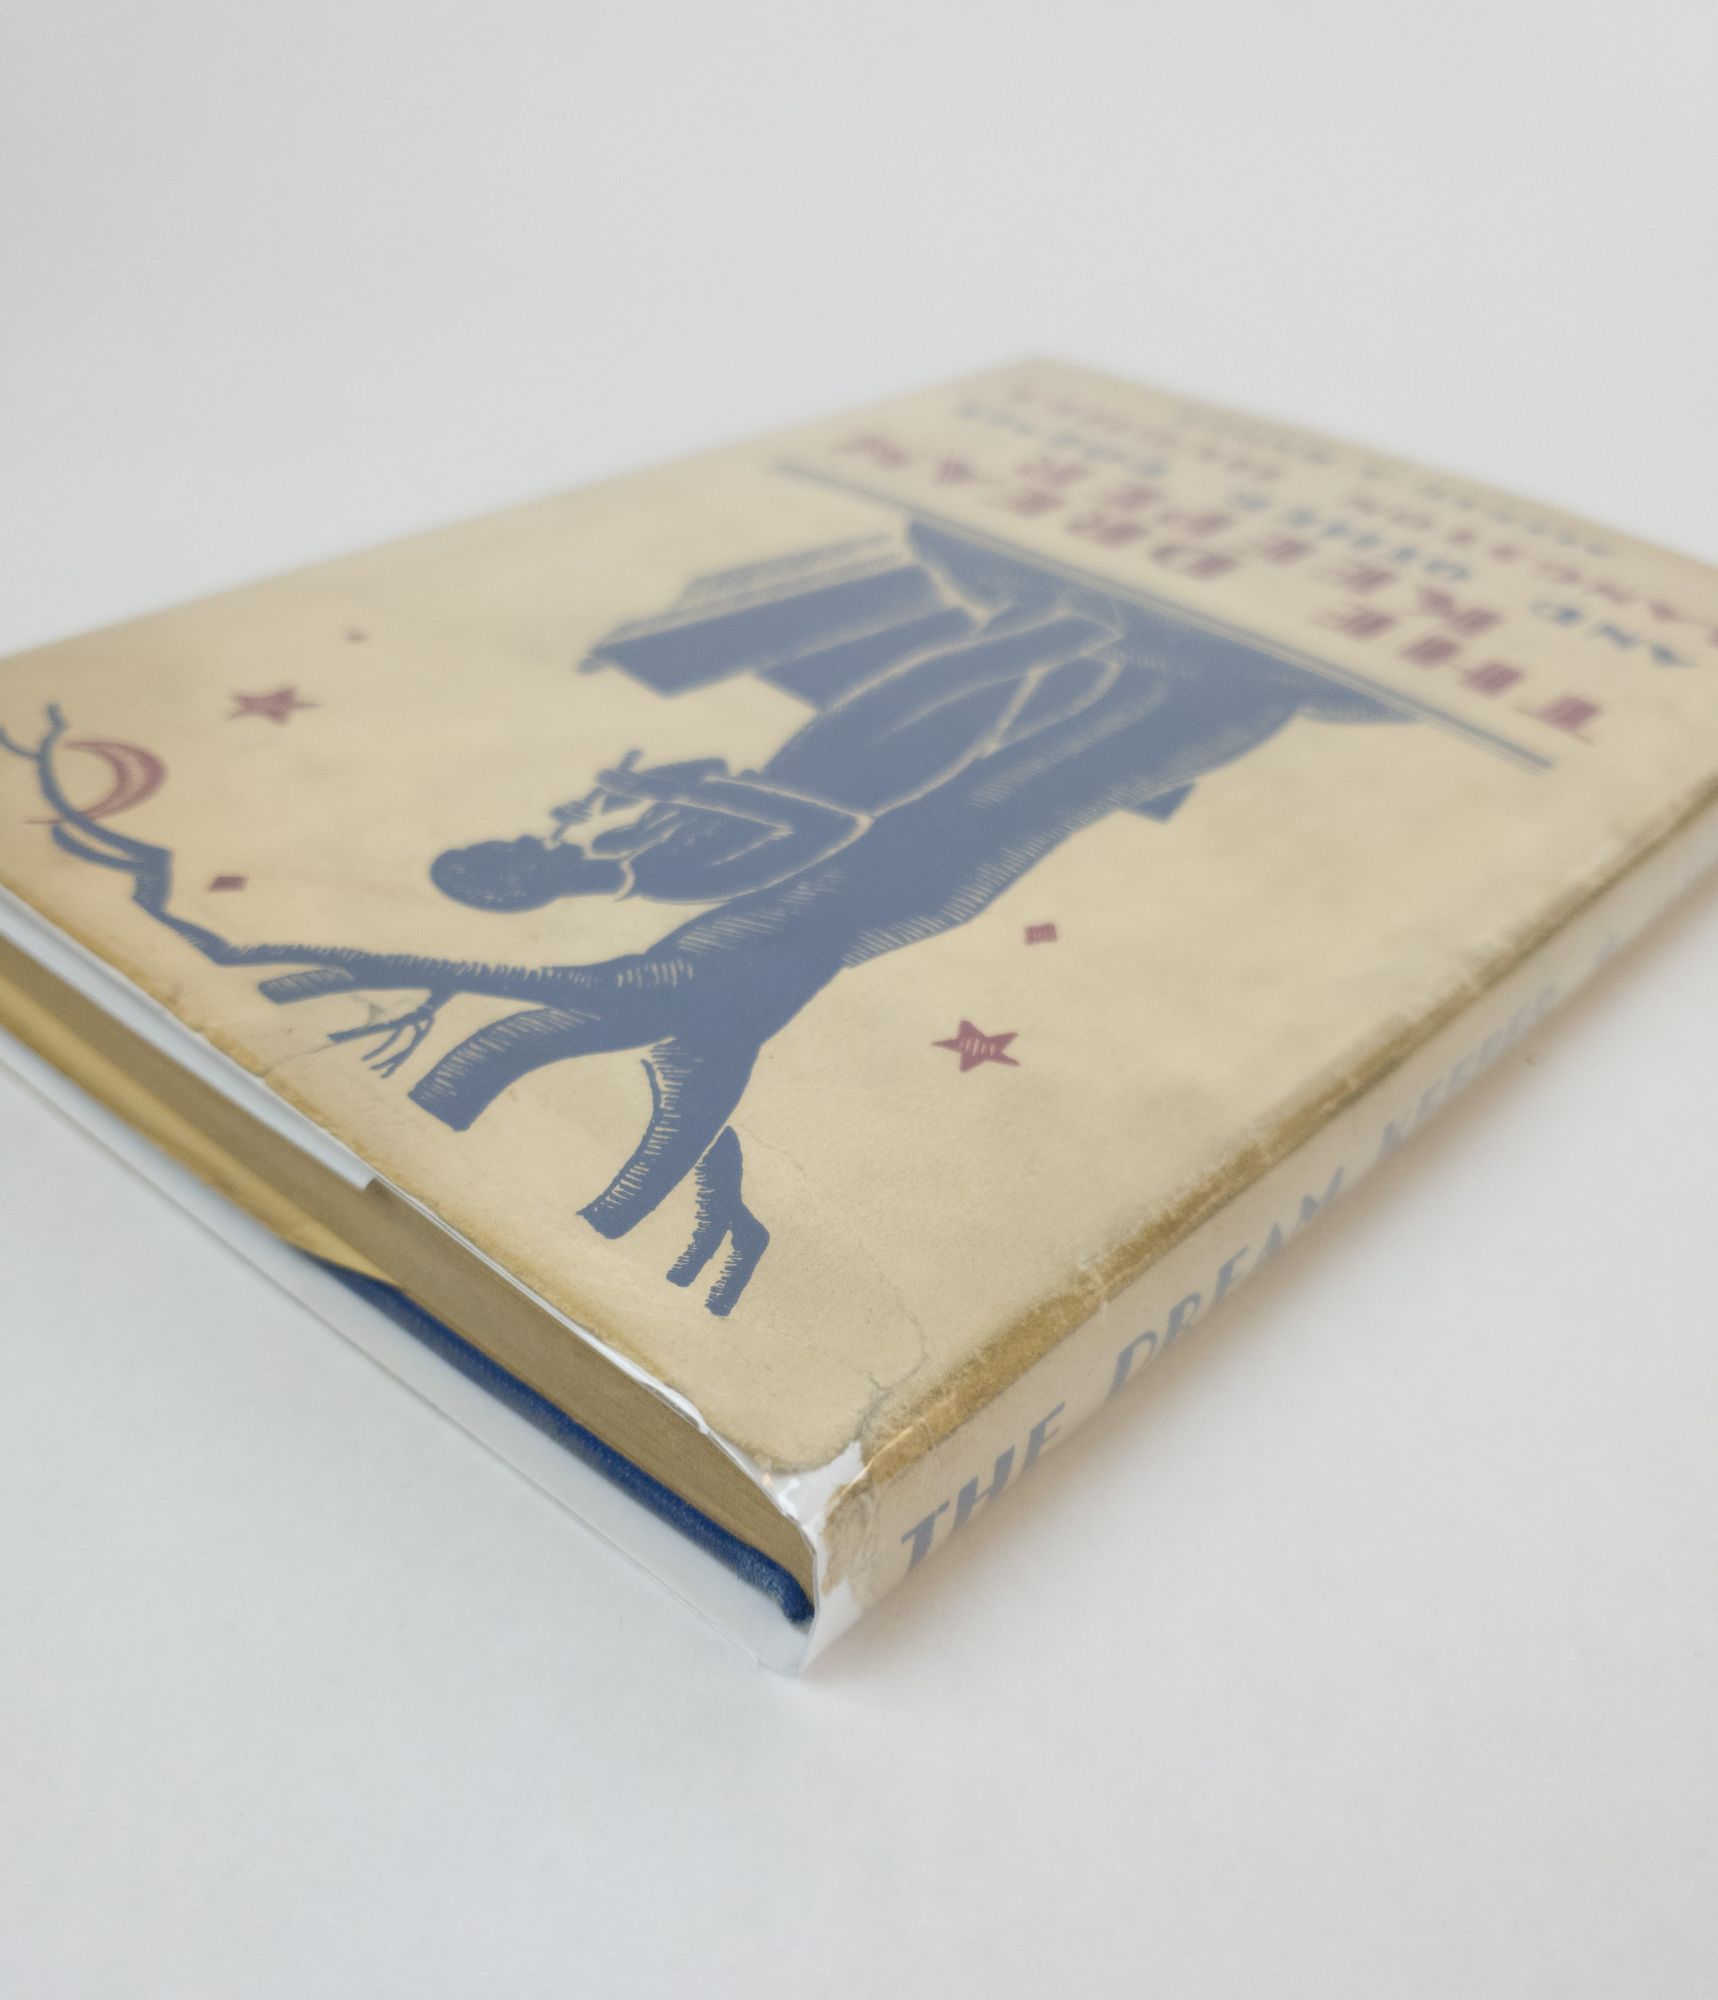 Product Image for THE DREAM KEEPER AND OTHER POEMS [INSCRIBED]